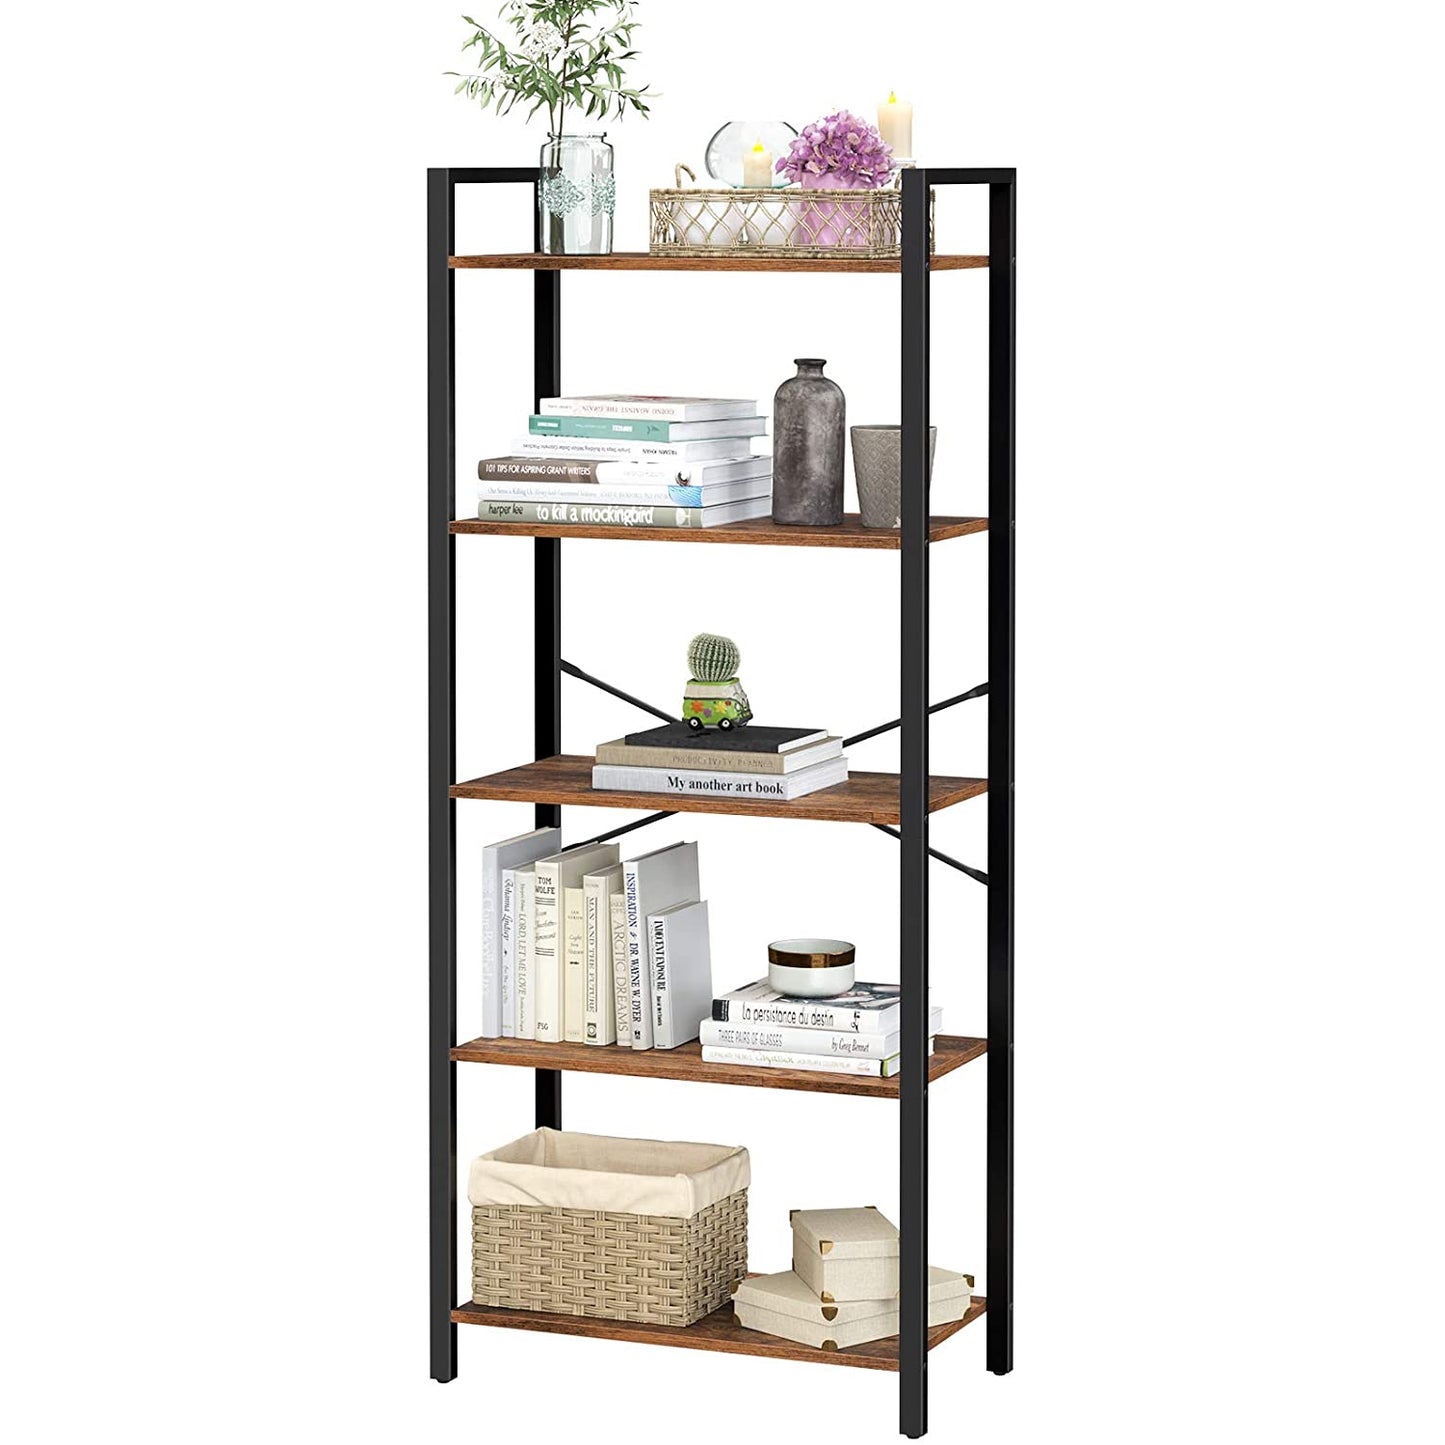 Nancy's Winstonhill Bookcase - Vintage Wall Cabinet - Standing Cabinet - Brown - 66 x 30 x 153 cm